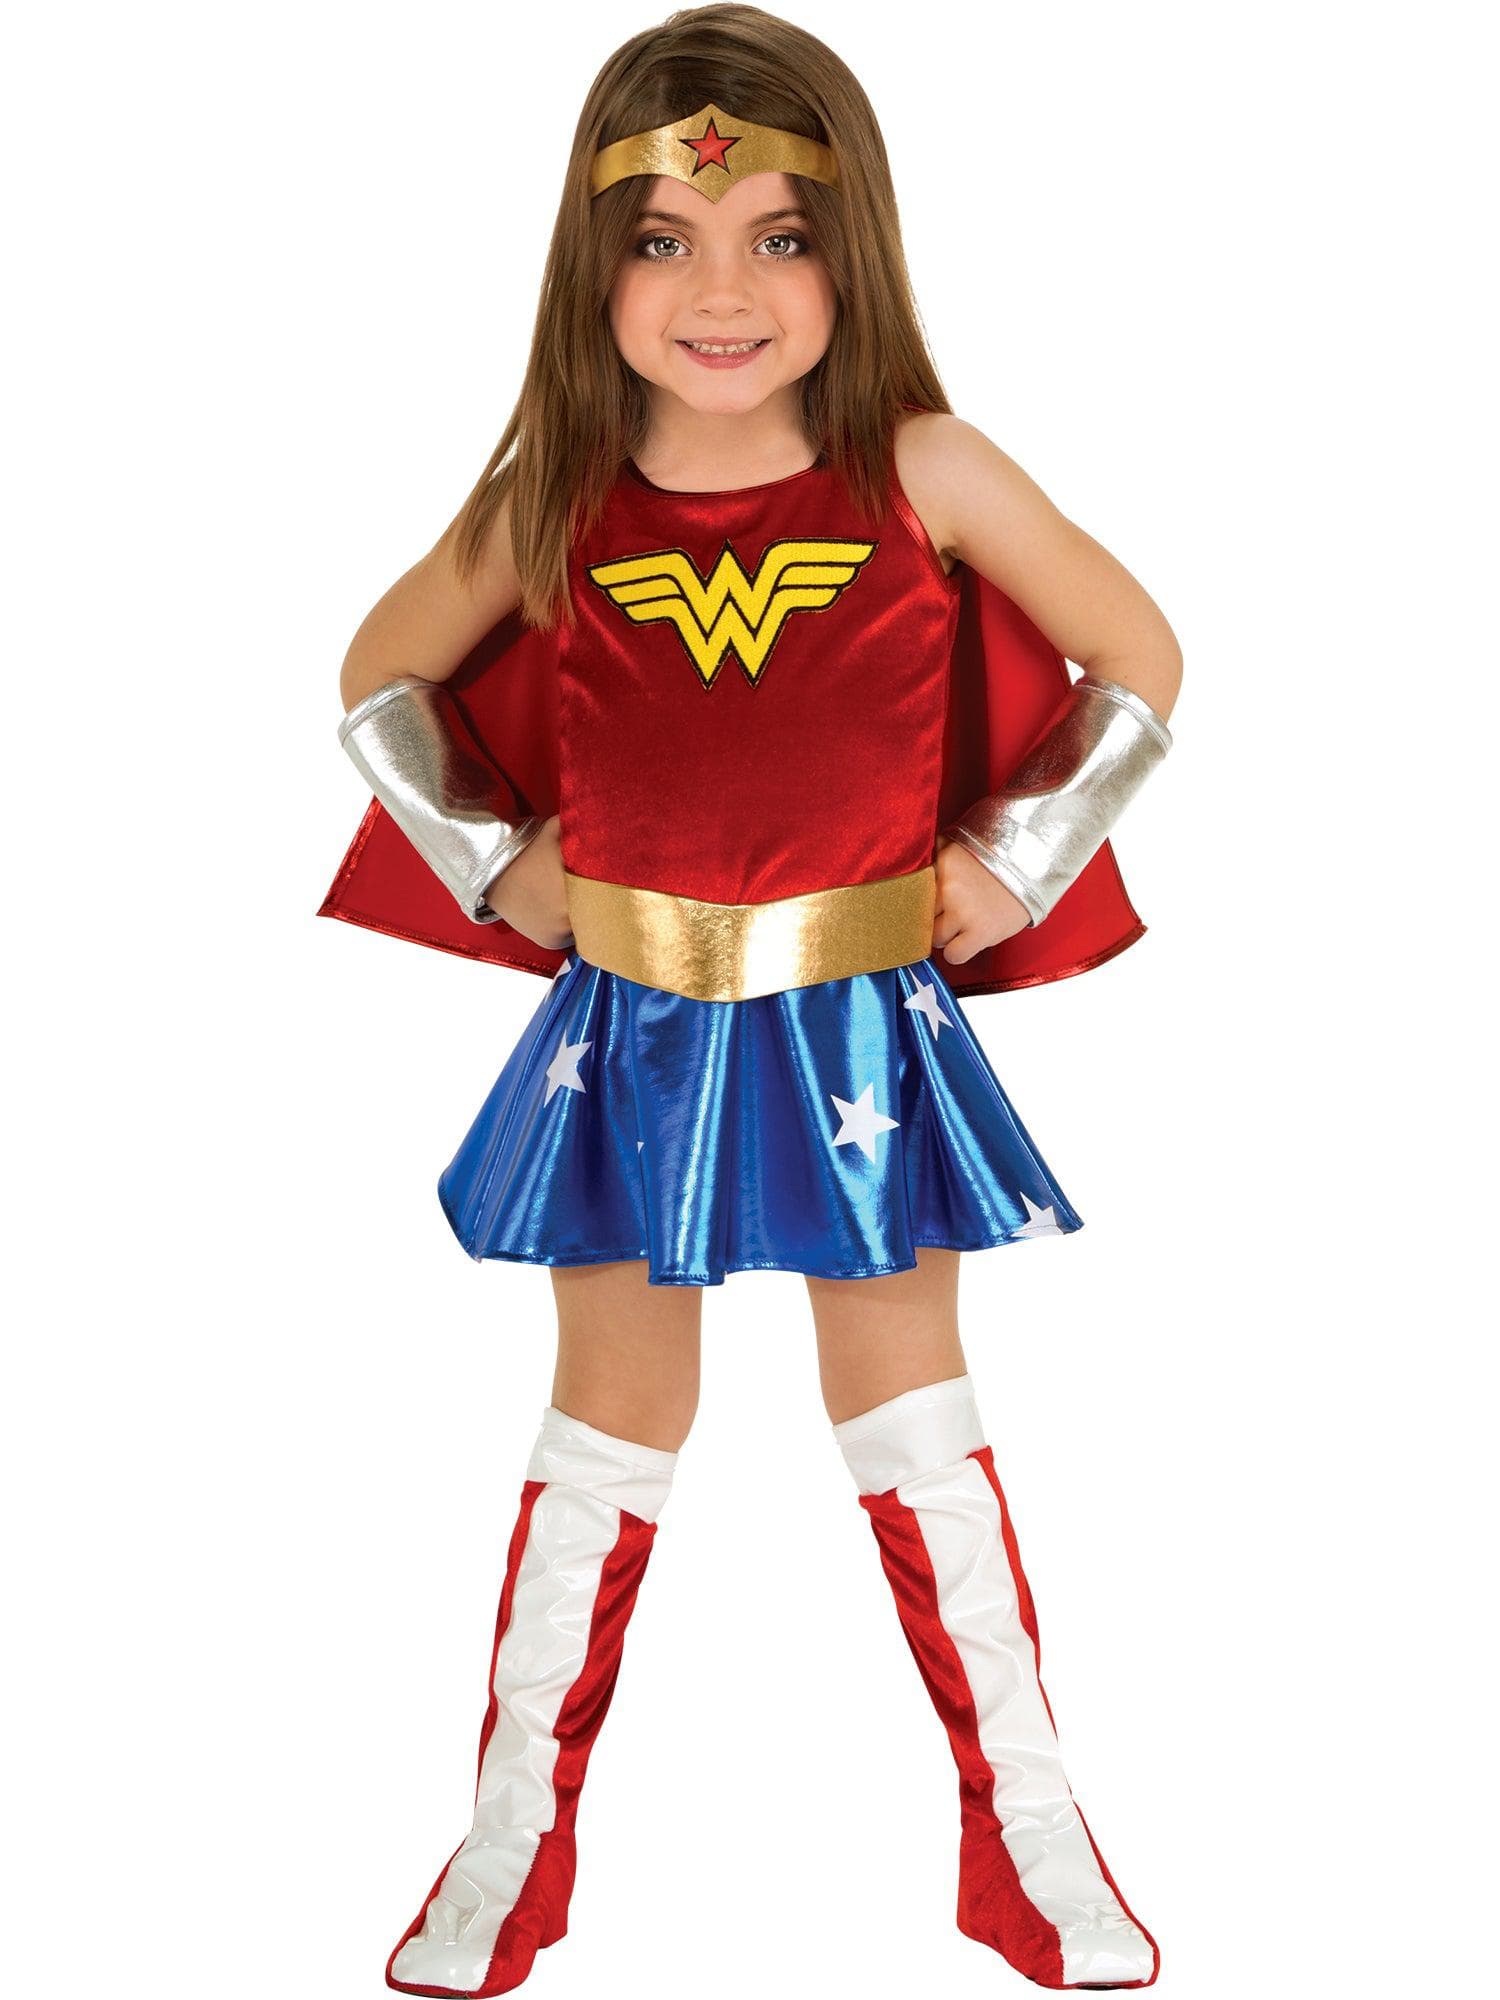 Costumes for Adults, Kids & Pets | Costumes.com